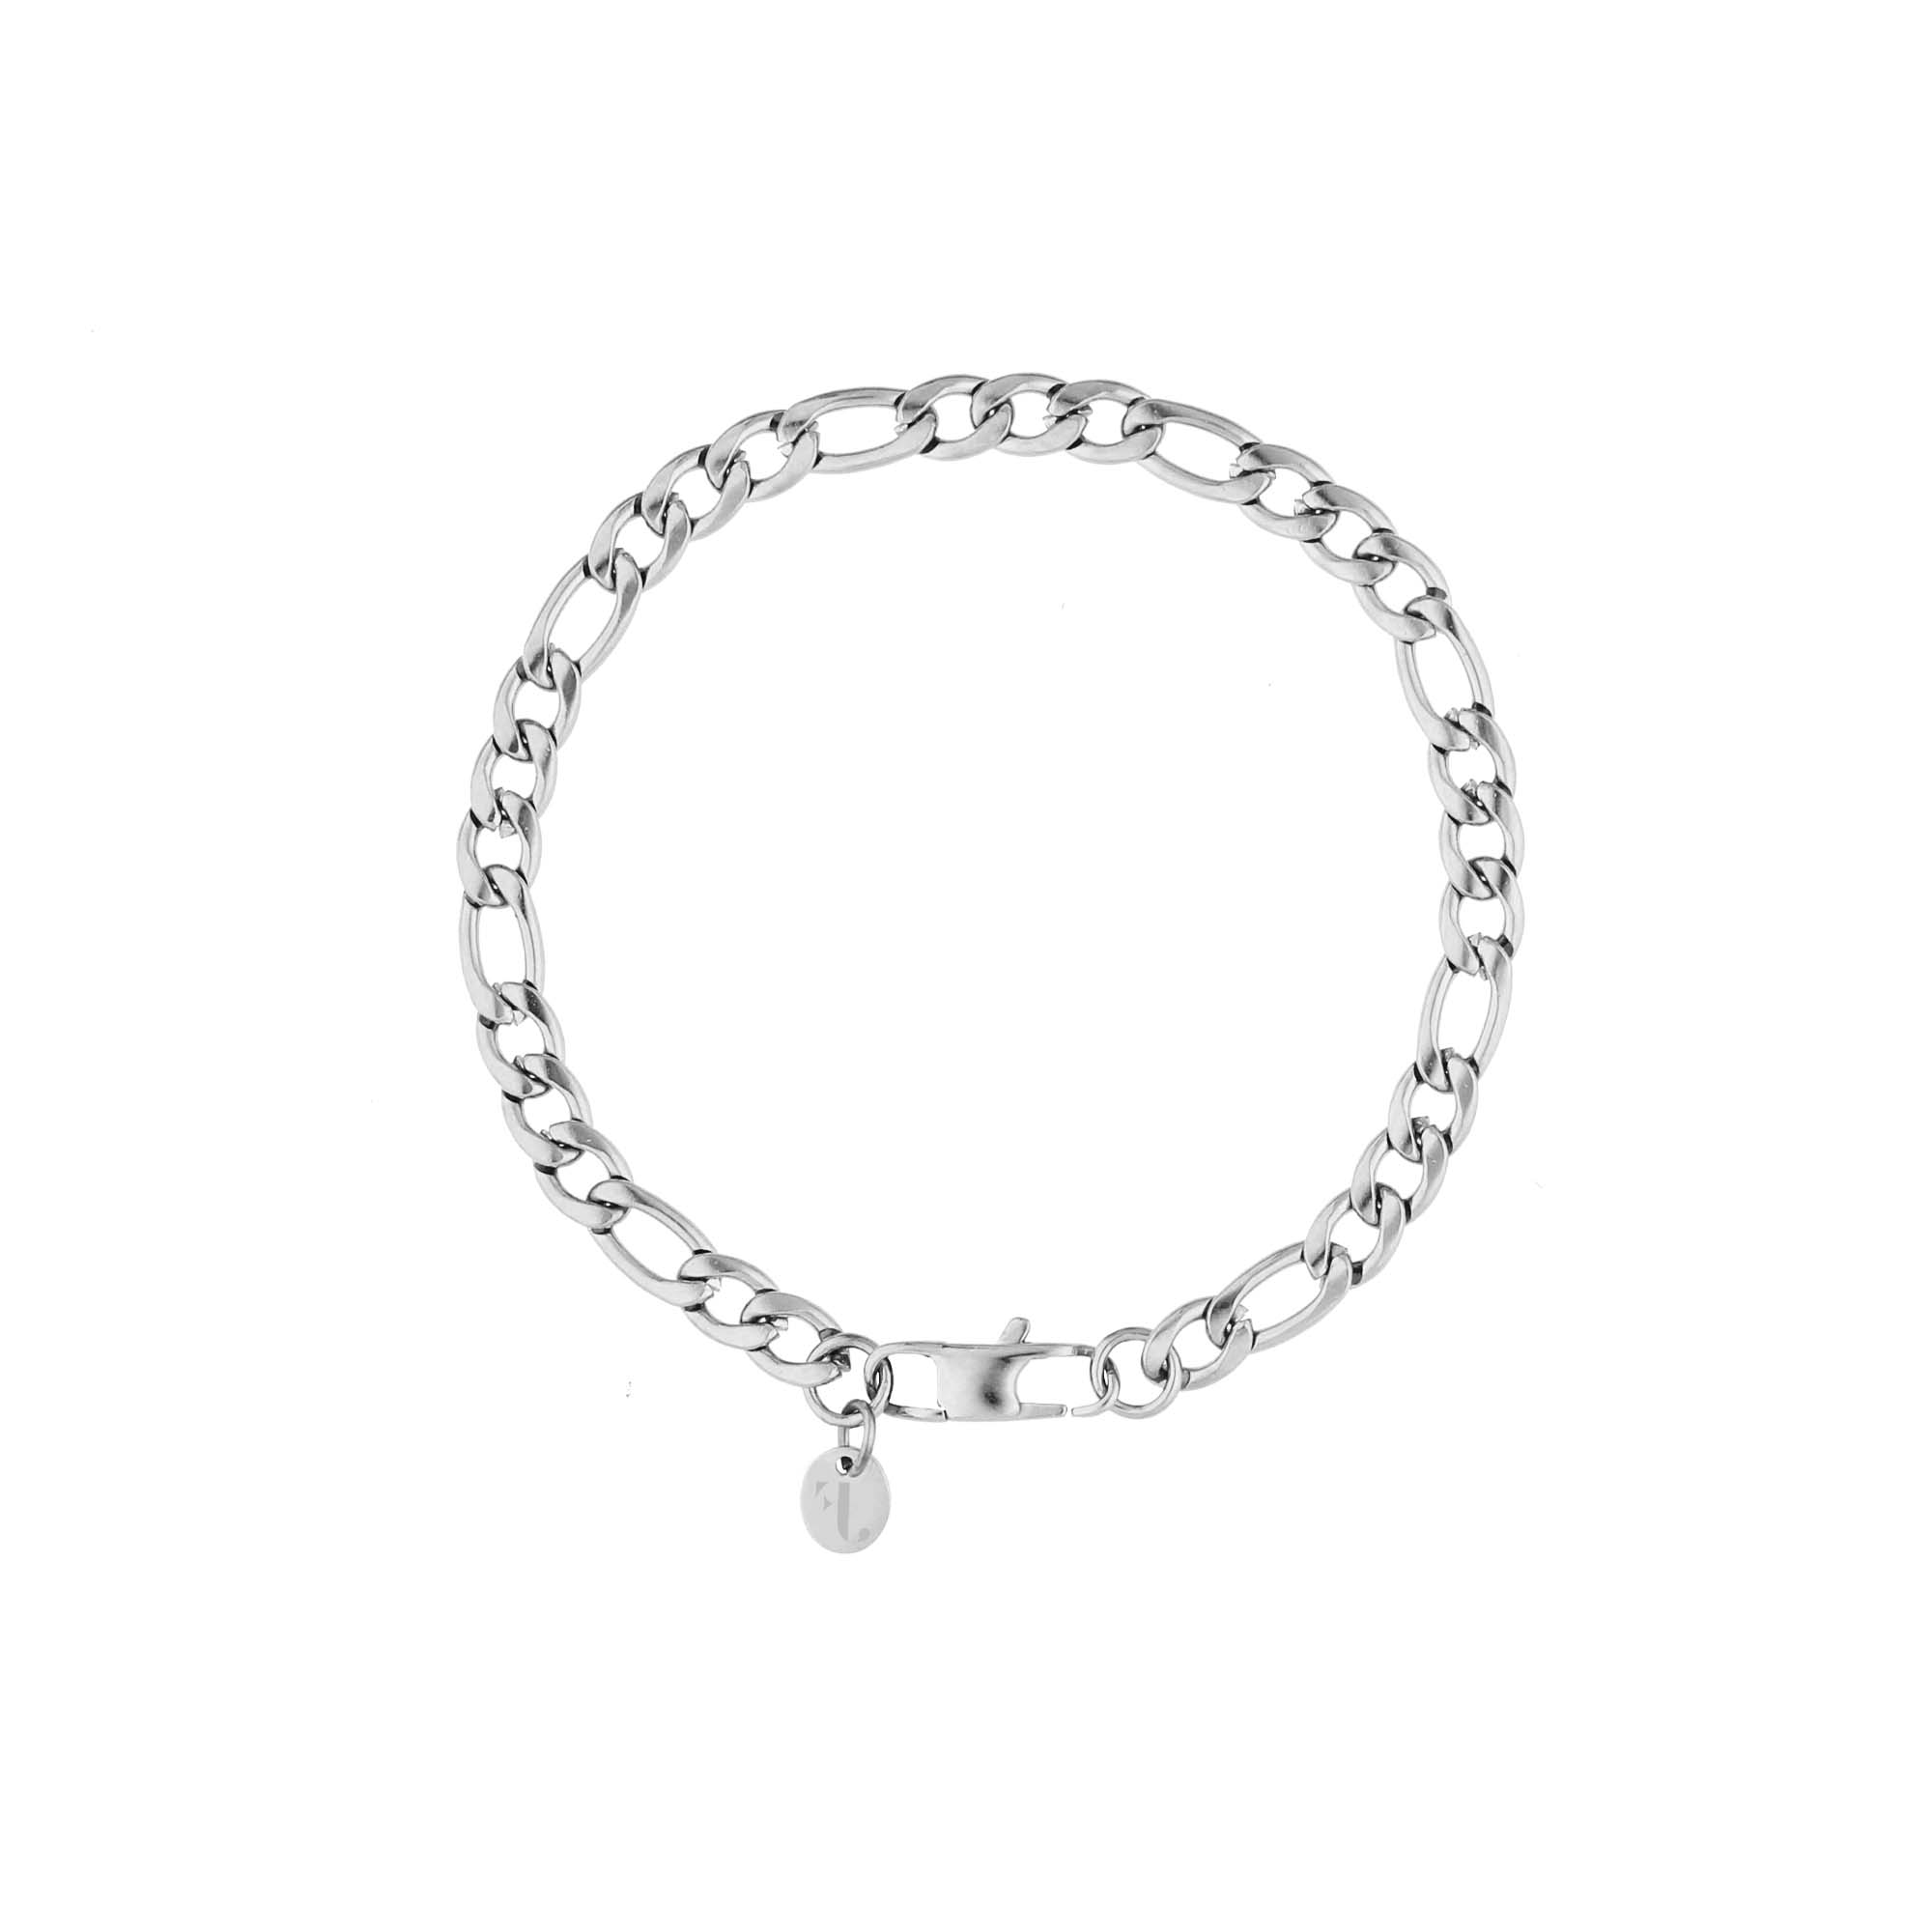 Rhône men's bracelet by Five Jwlry, crafted from a 5mm figaro chain in silver-colored, water-resistant 316L stainless steel. Available in sizes 20cm and 22cm, and hypoallergenic.